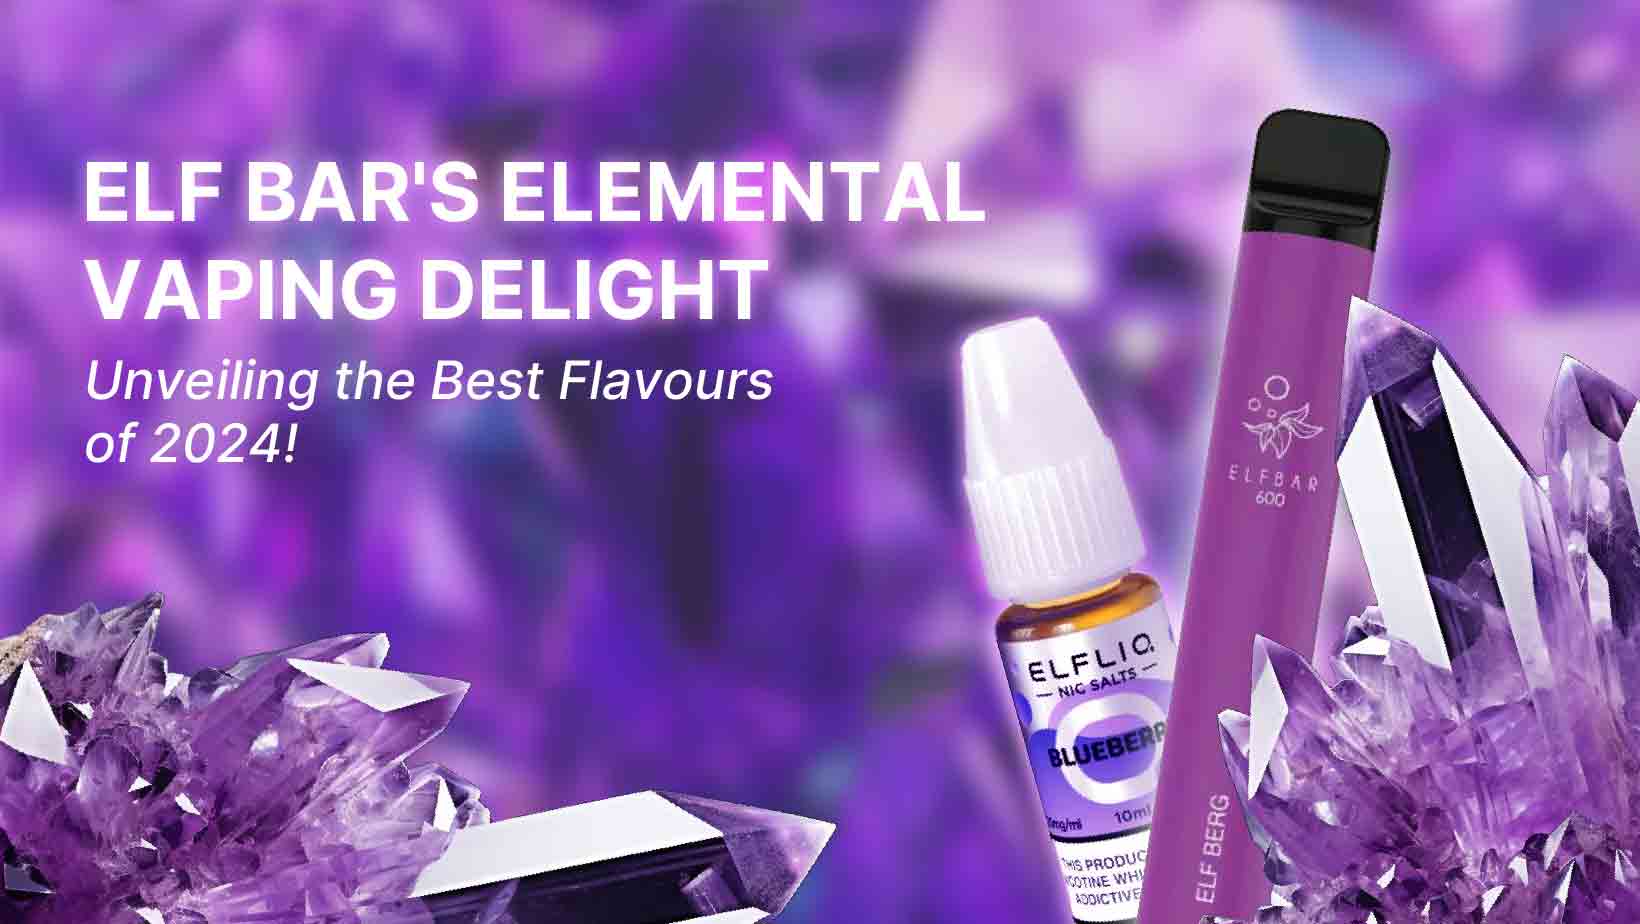 Elf Bar's Elemental Vaping Delight: Unveiling the Best Flavours of 2024